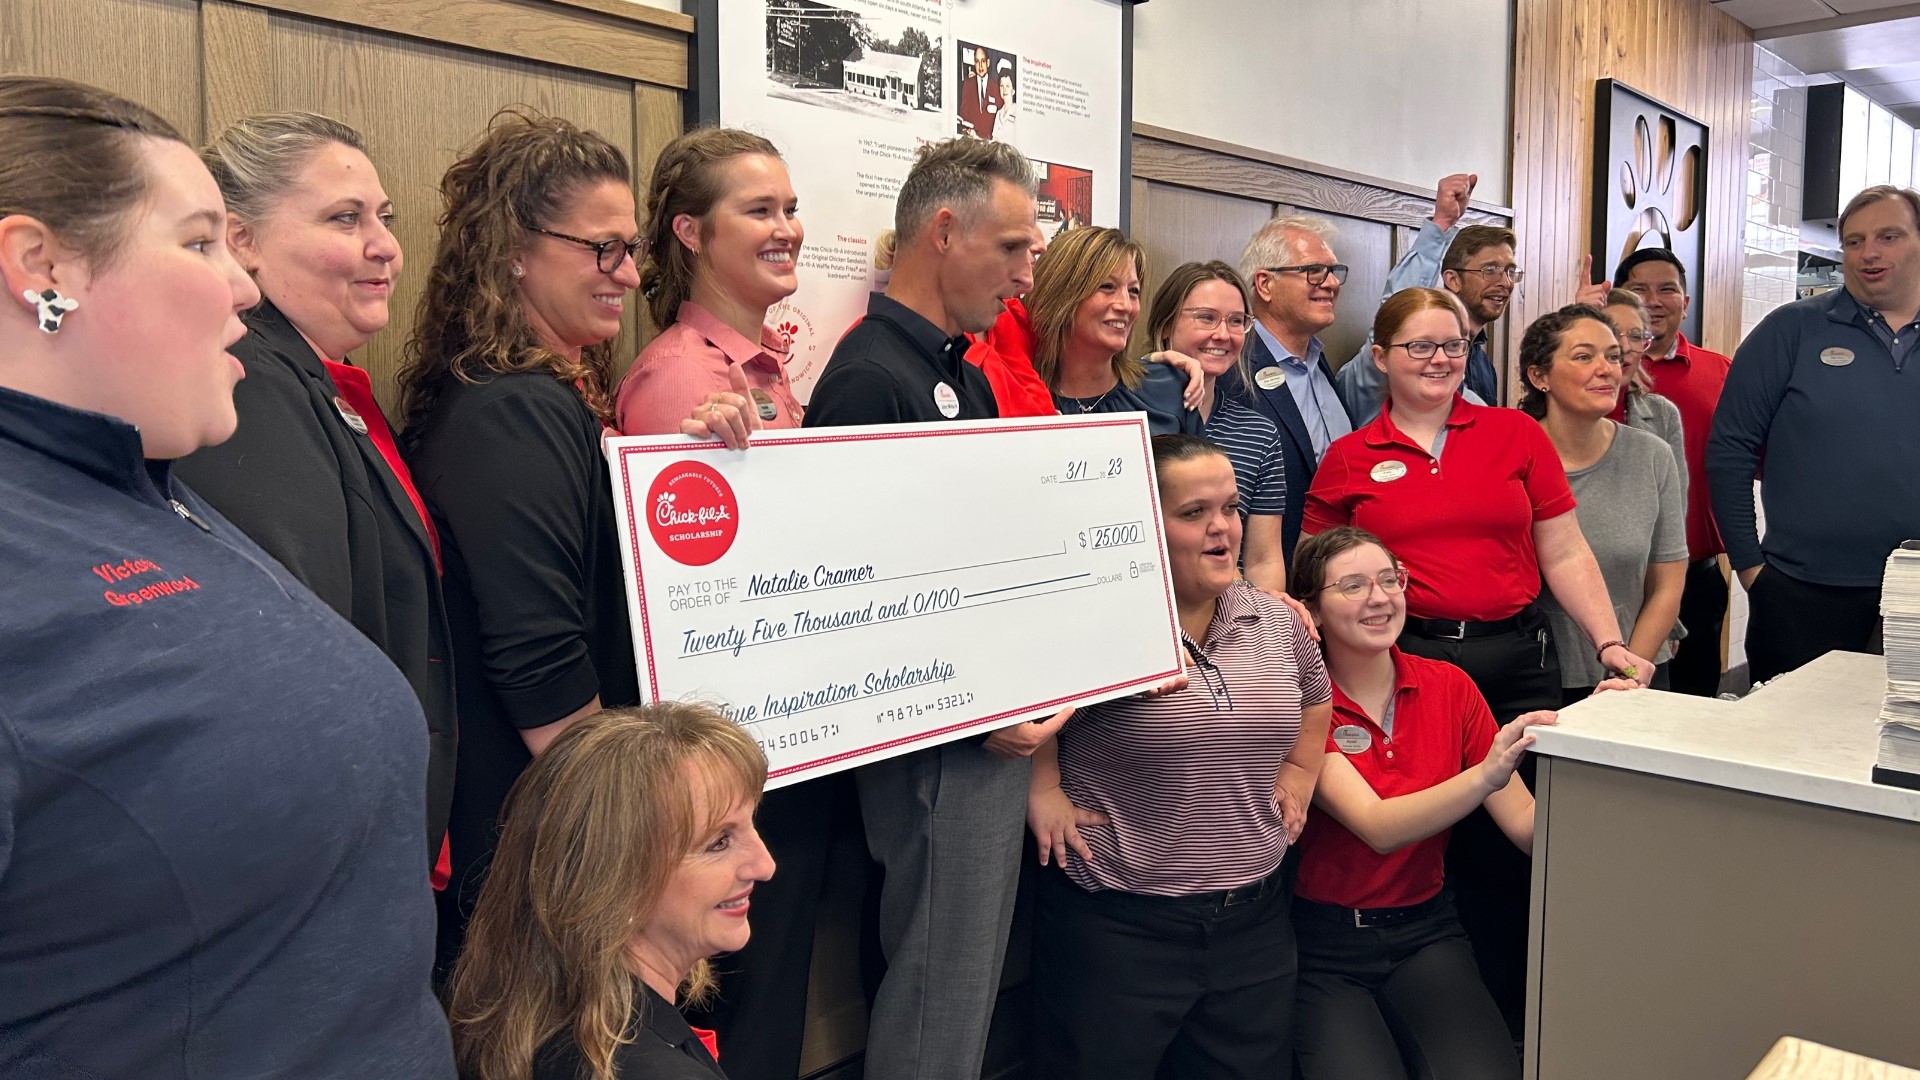 A Greenwood Chick-fil-A employee received a surprise scholarship while at work.